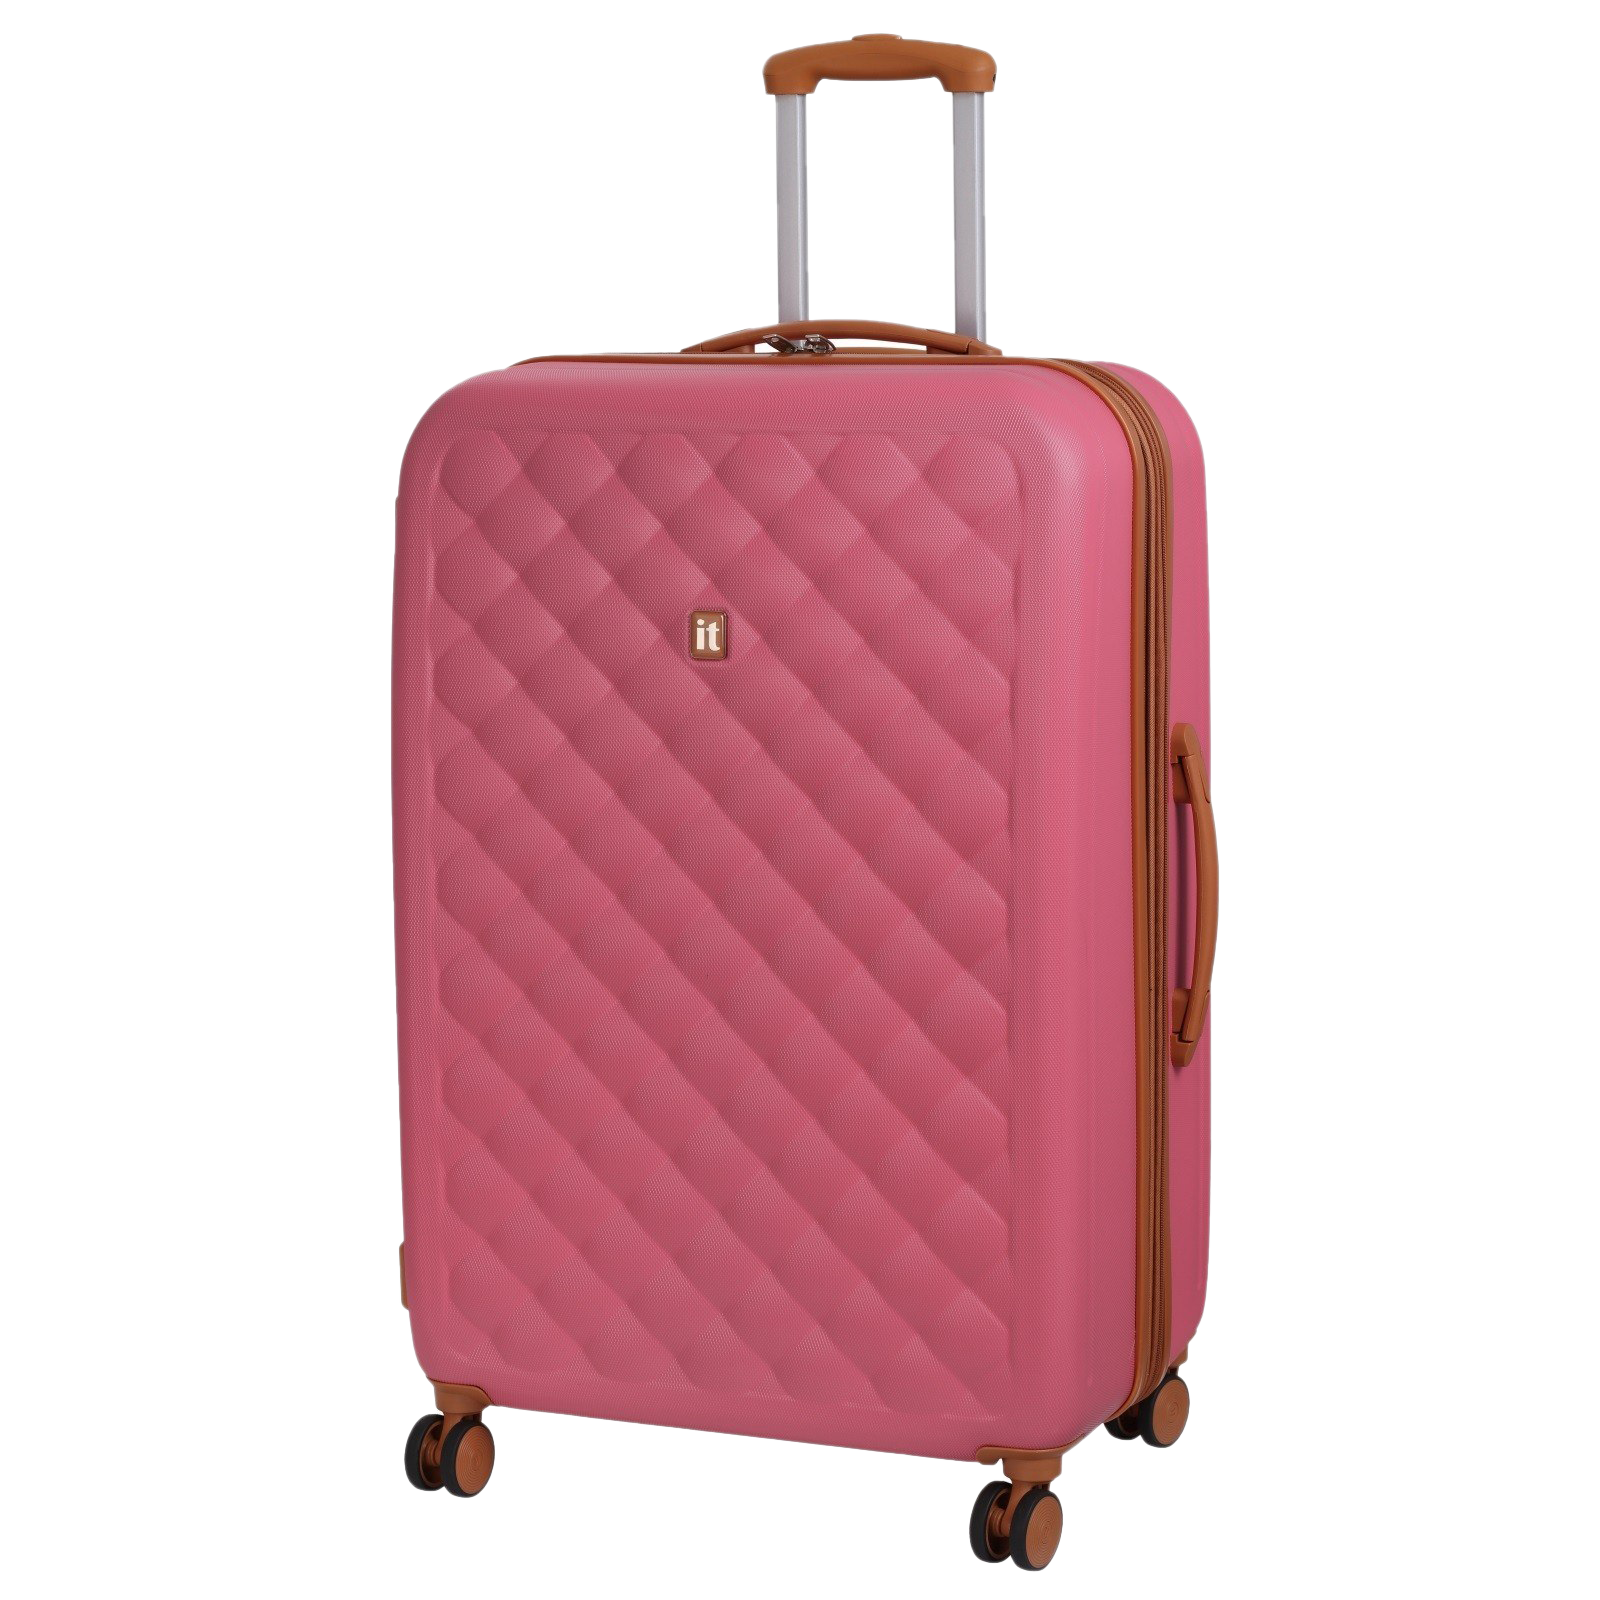 Suitcase PNG HD Quality